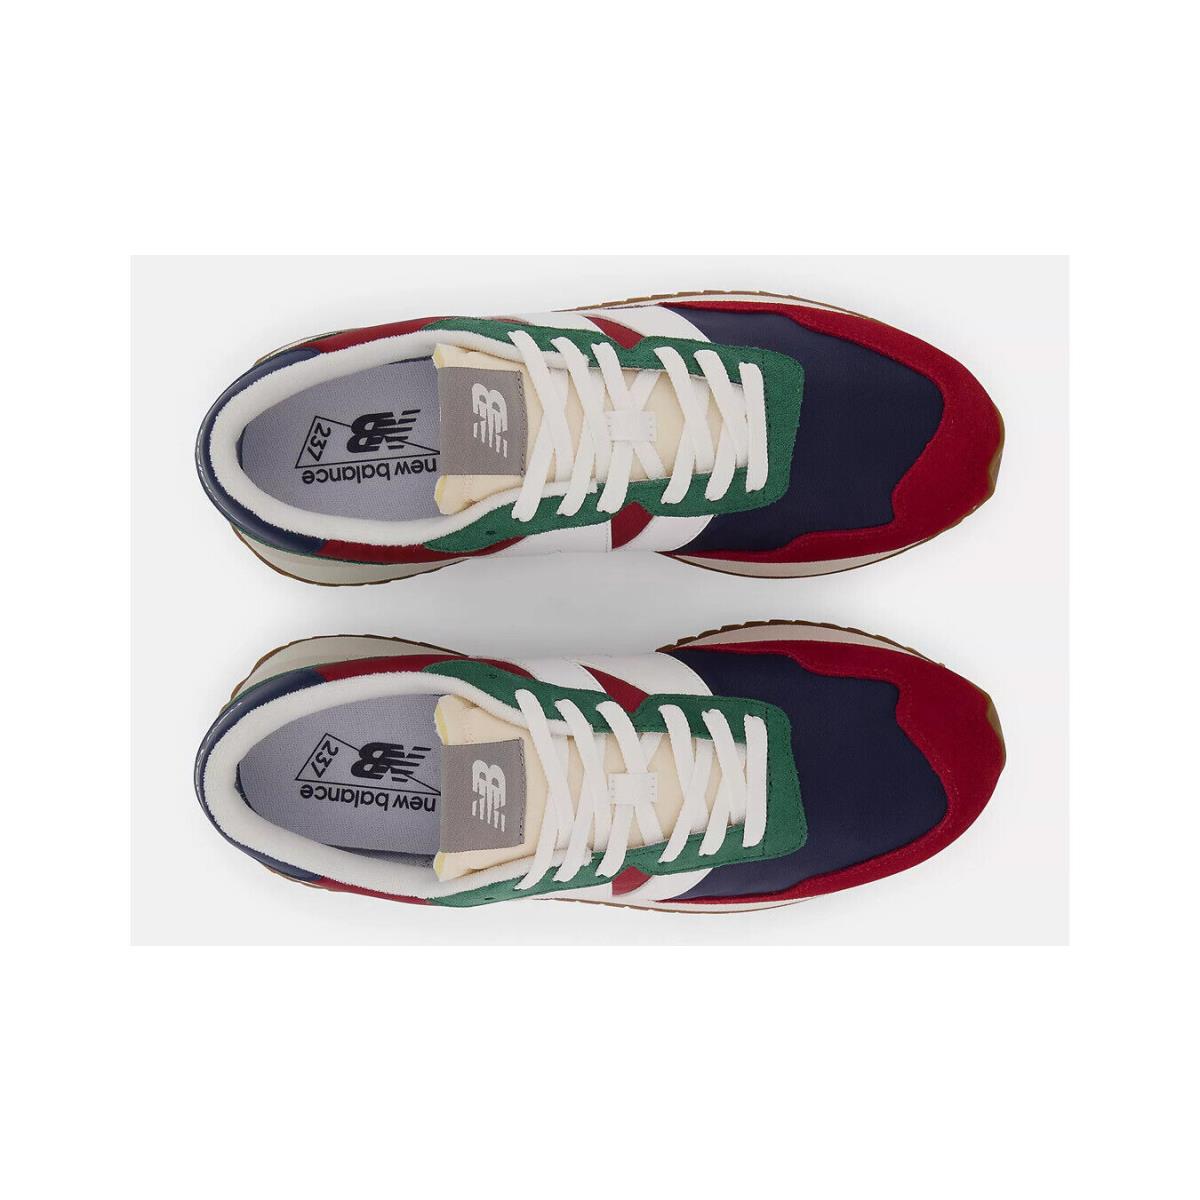 New Balance shoes  - Red/Green/Navy Blue 9